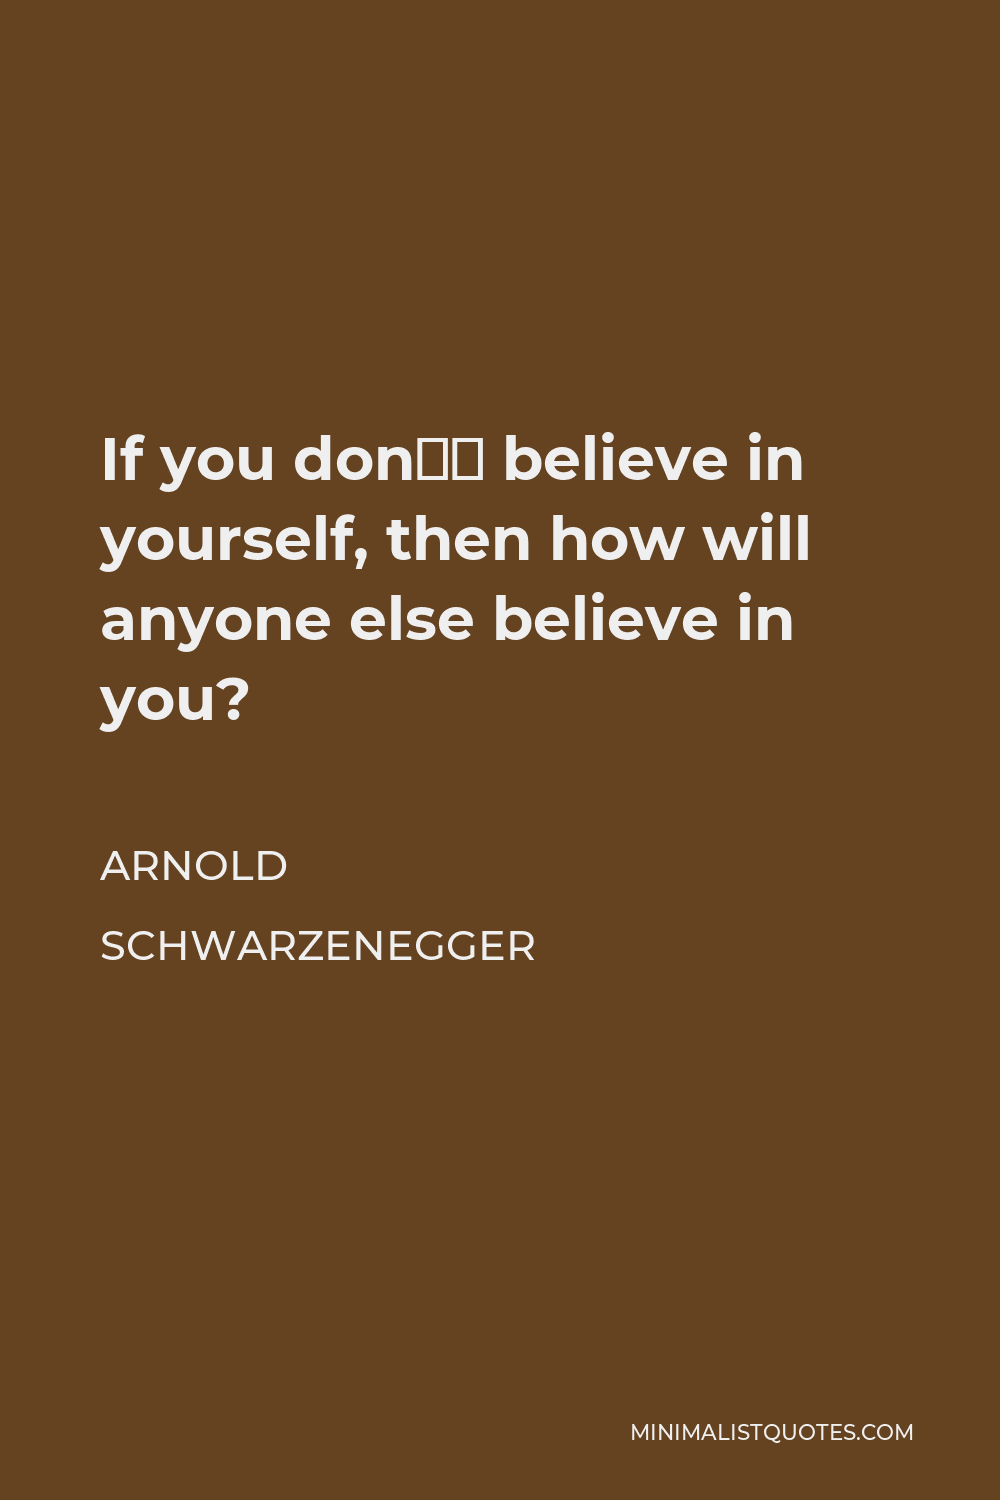 Arnold Schwarzenegger Quote - If you don’t believe in yourself, then how will anyone else believe in you?